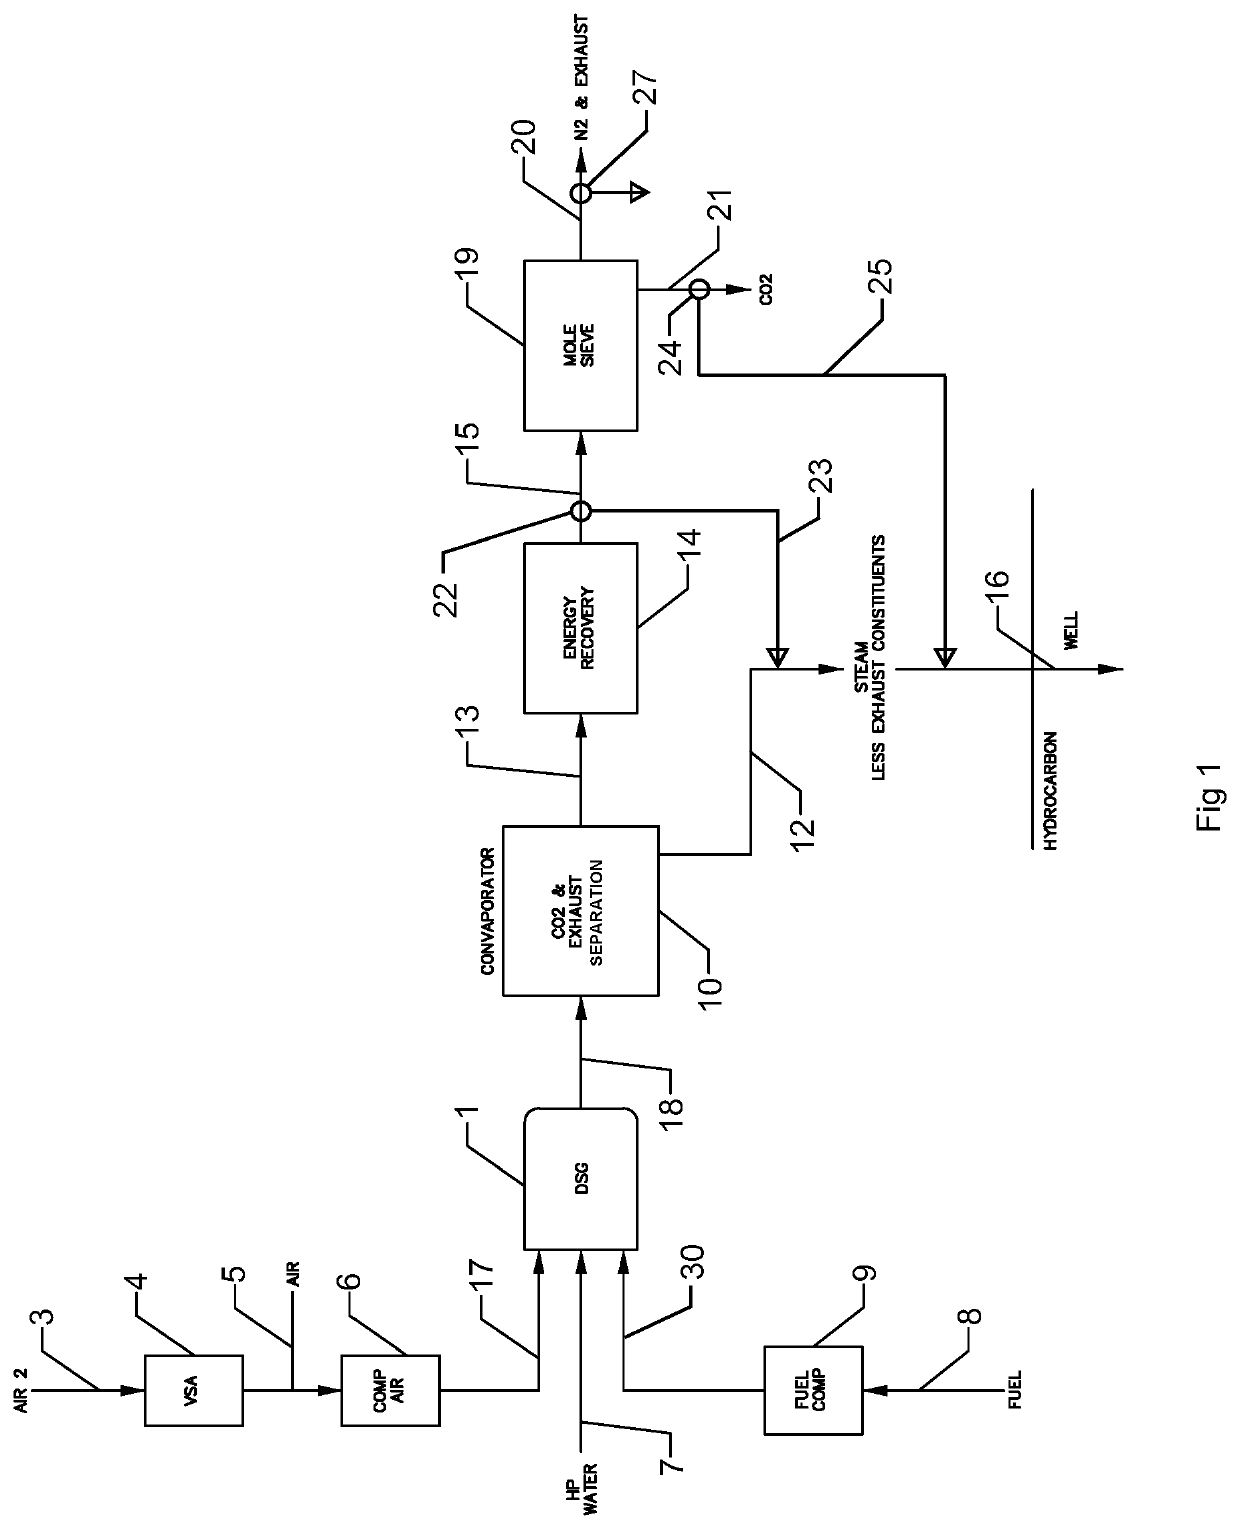 Large scale cost effective direct steam generator system, method, and apparatus